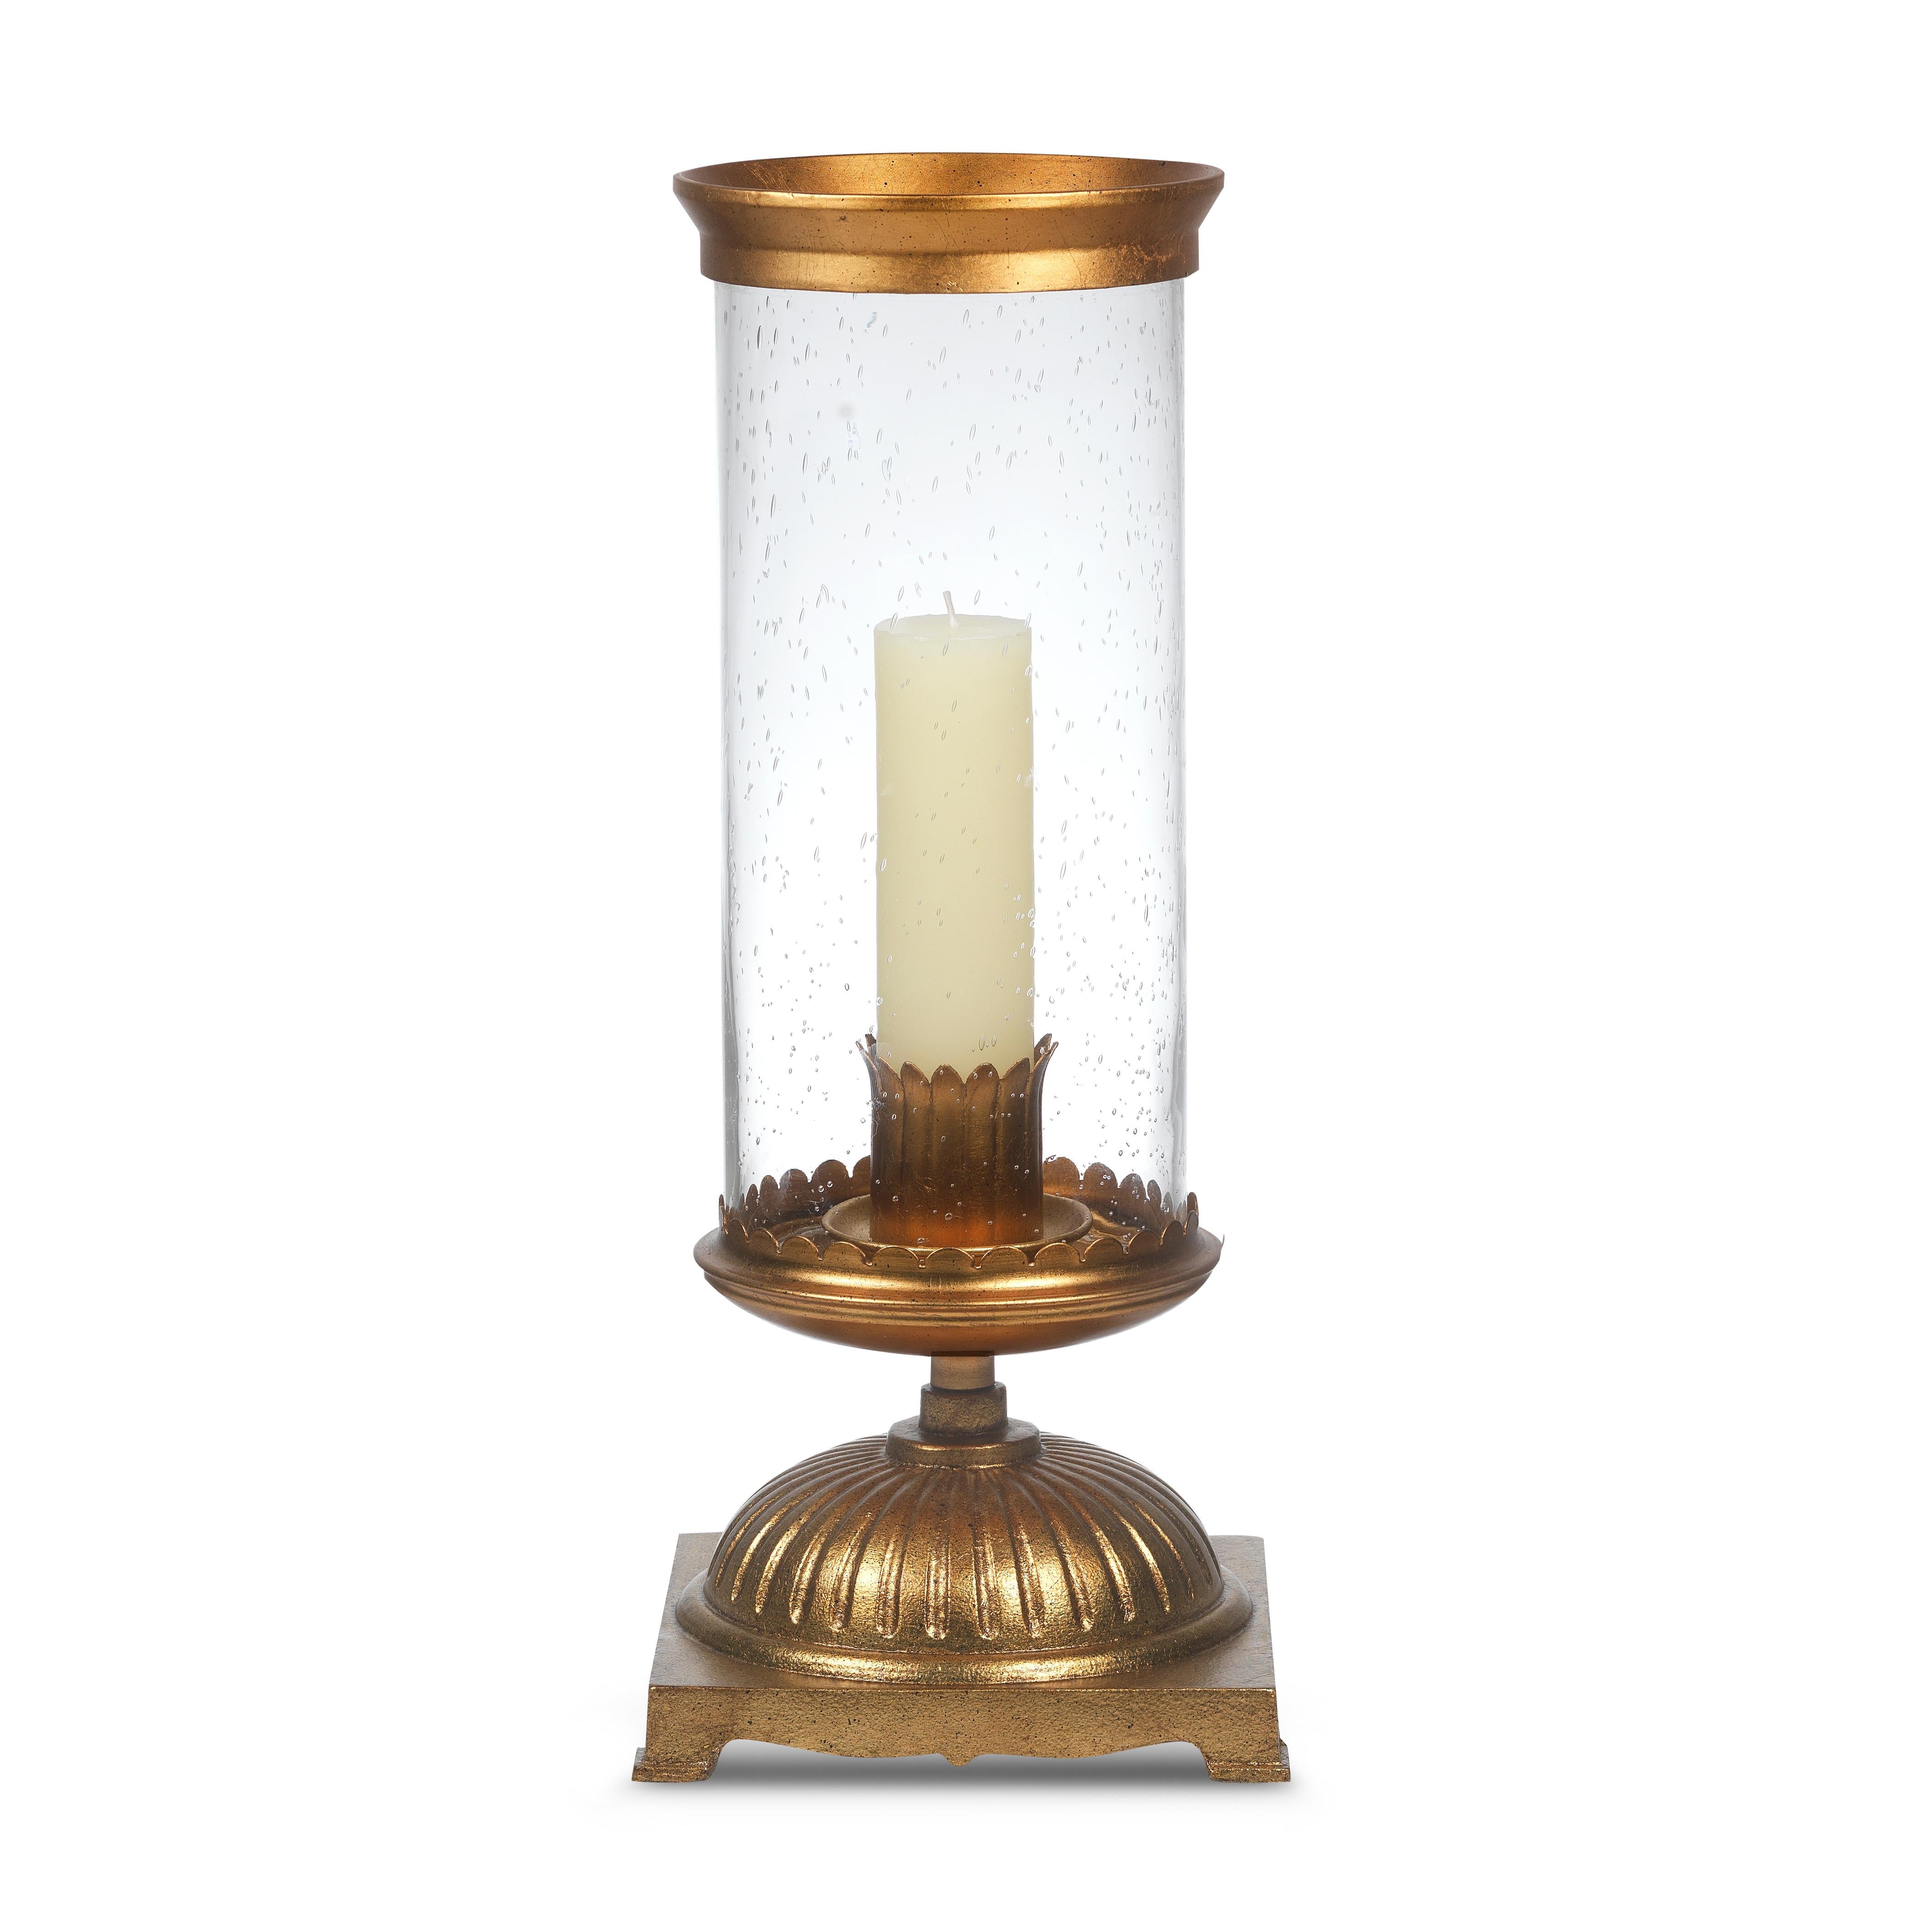 This cast metal hurricane looks stately alone or in pairs on a mantel or console. Inspired by a 1940’s form it boasts a handblown glass shade and an antique gilt finish. The bobesche accommodates a 2” diameter candle (not included).
